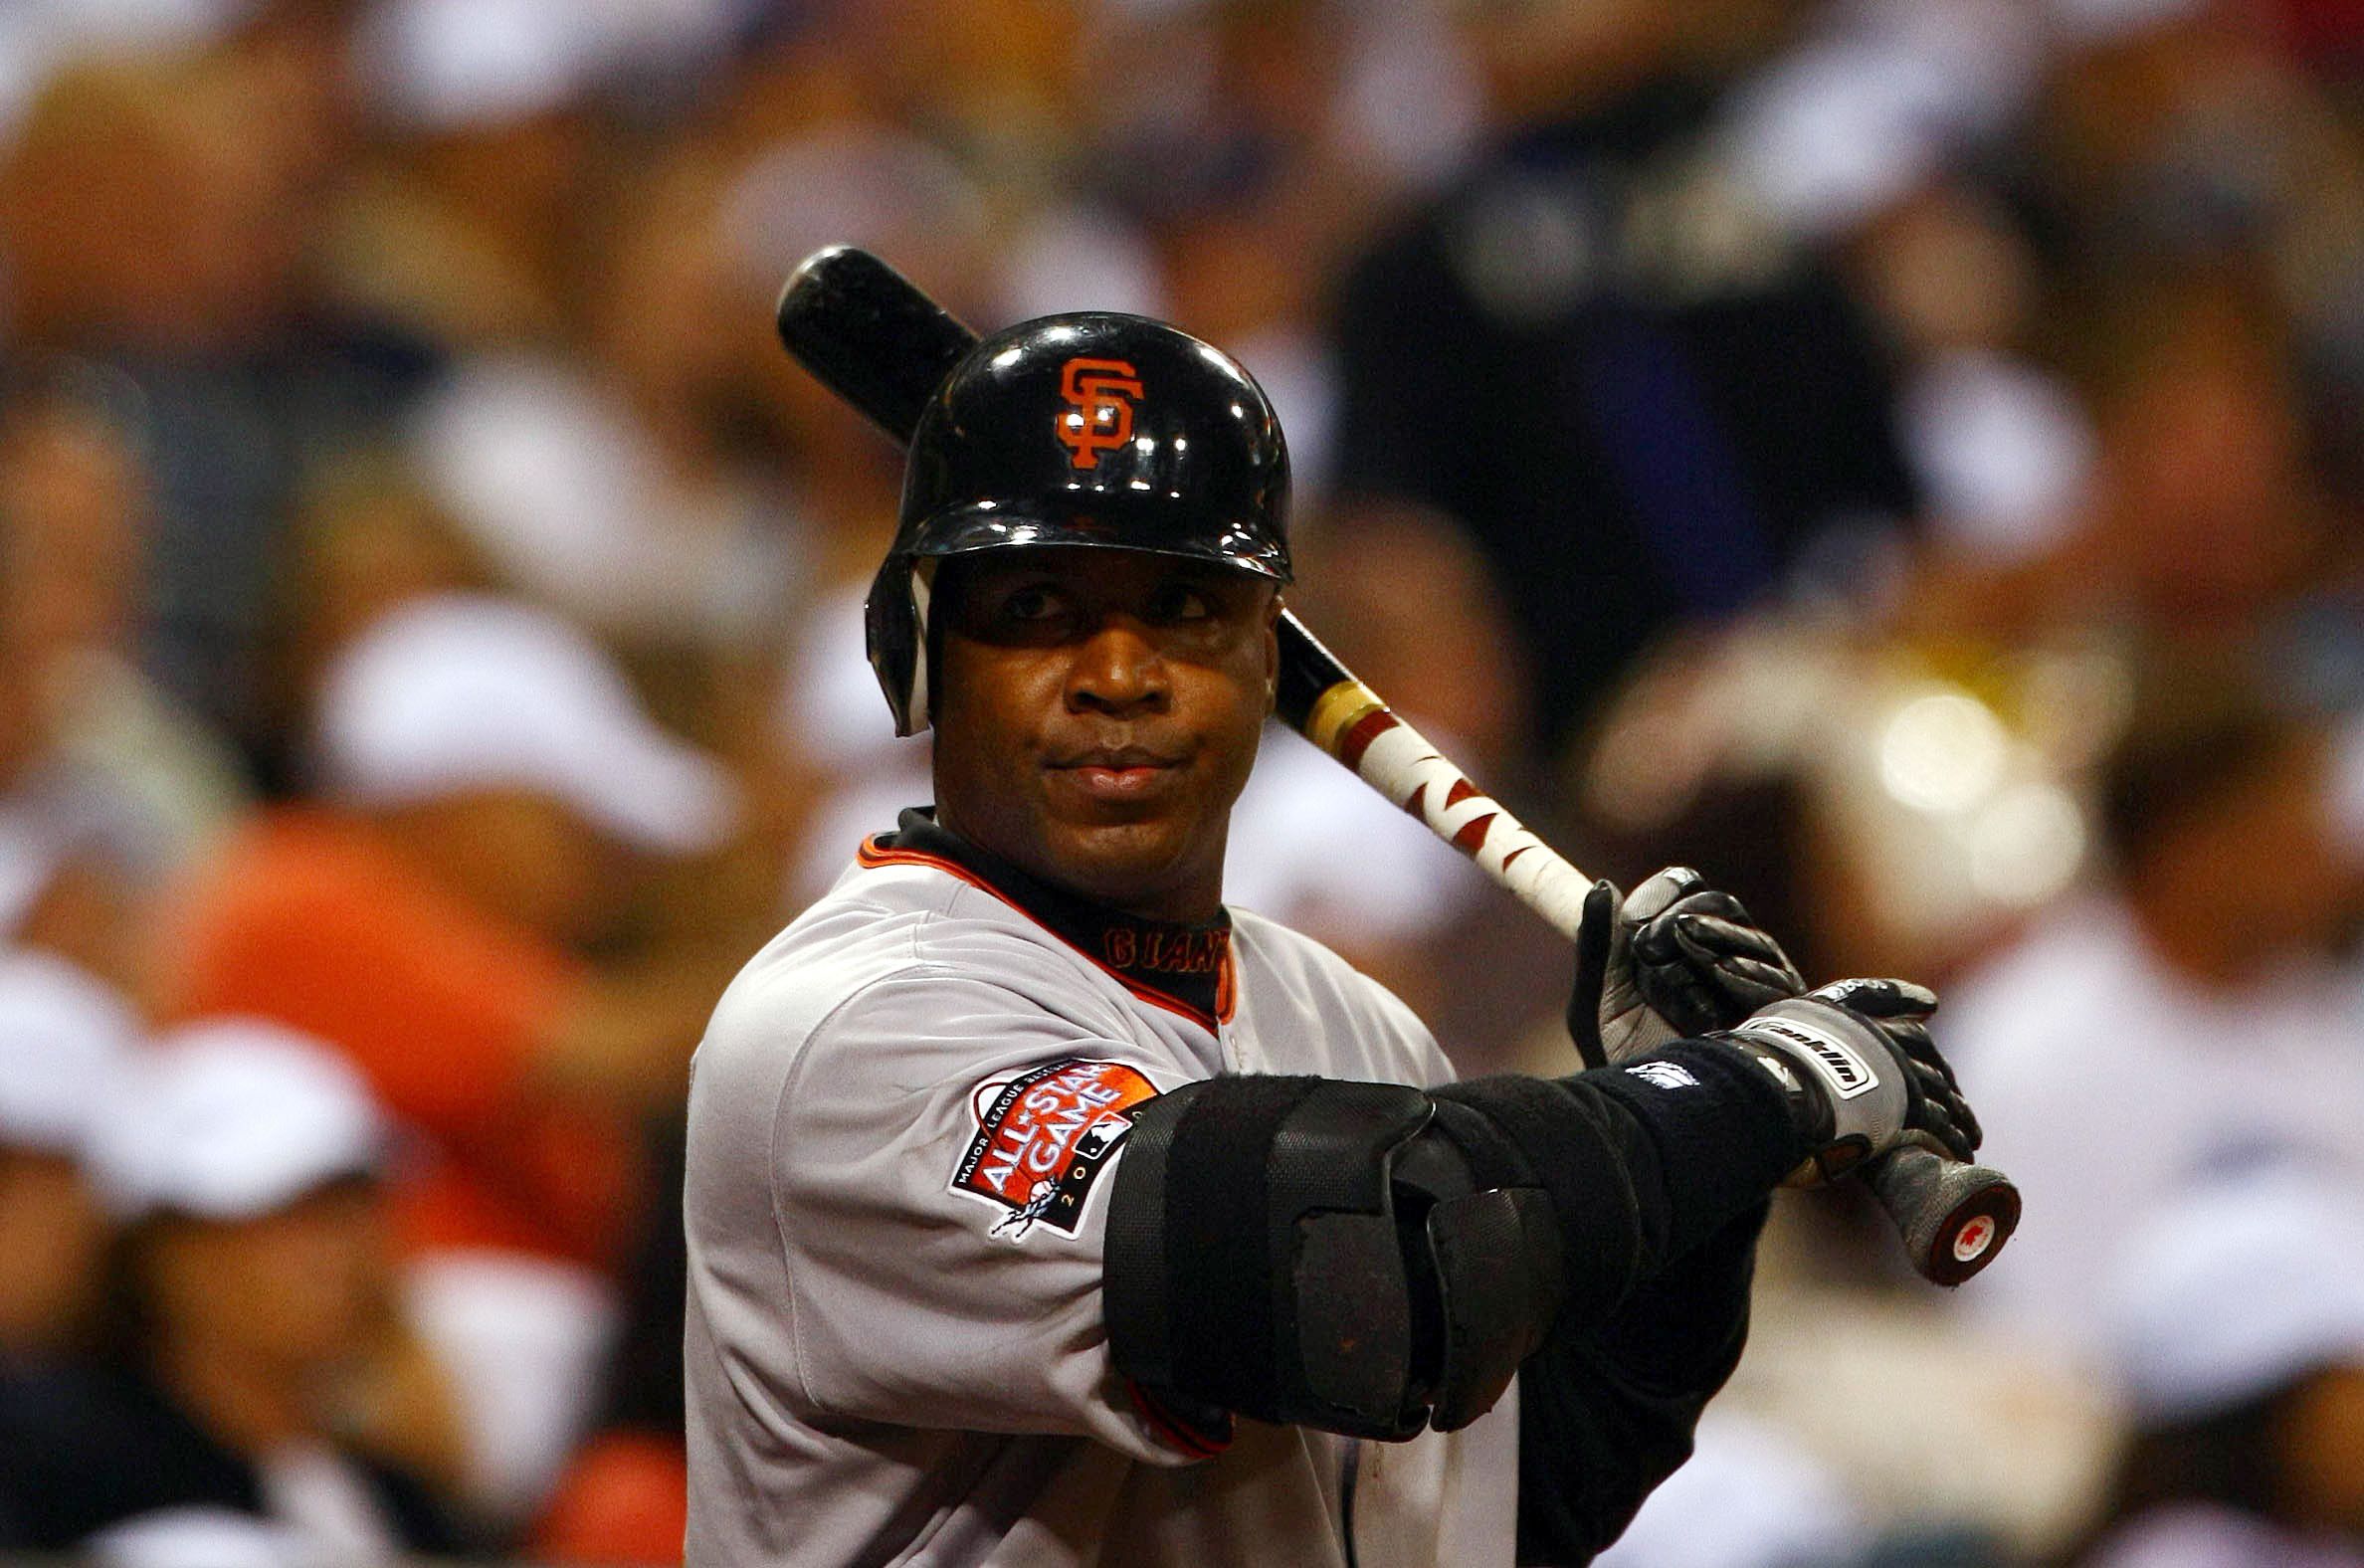 Barry Bonds documentary to reportedly be produced by HBO